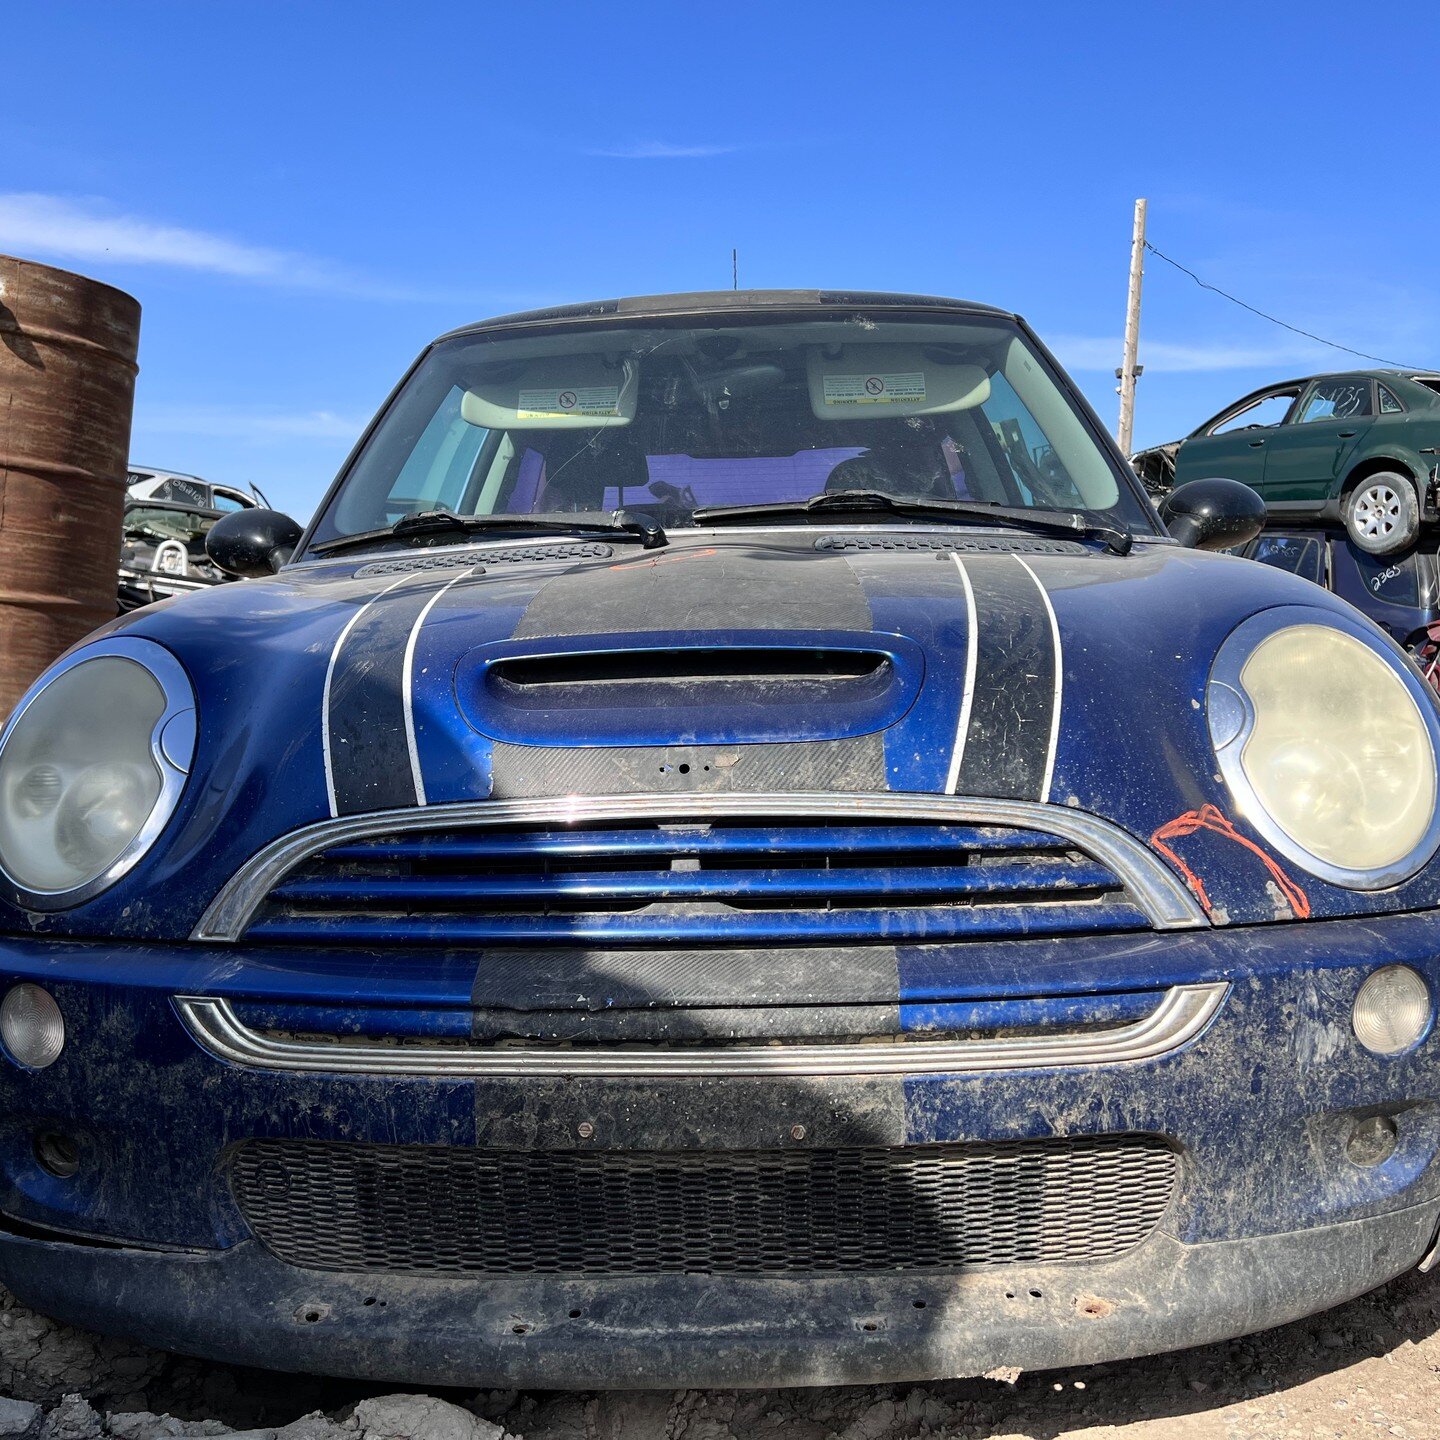 2003 MINI COOPER S 1.6L *FOR PARTS* - 4WD, MANUAL 6 SPEED TRANSMISSION, 4 CYLINDER , BLUE(862), KMS:248340, VIN:WMWRE334X3TD69296 

We offer contactless delivery and are more than willing to accommodate your needs.
Why pick your part when we pull it 